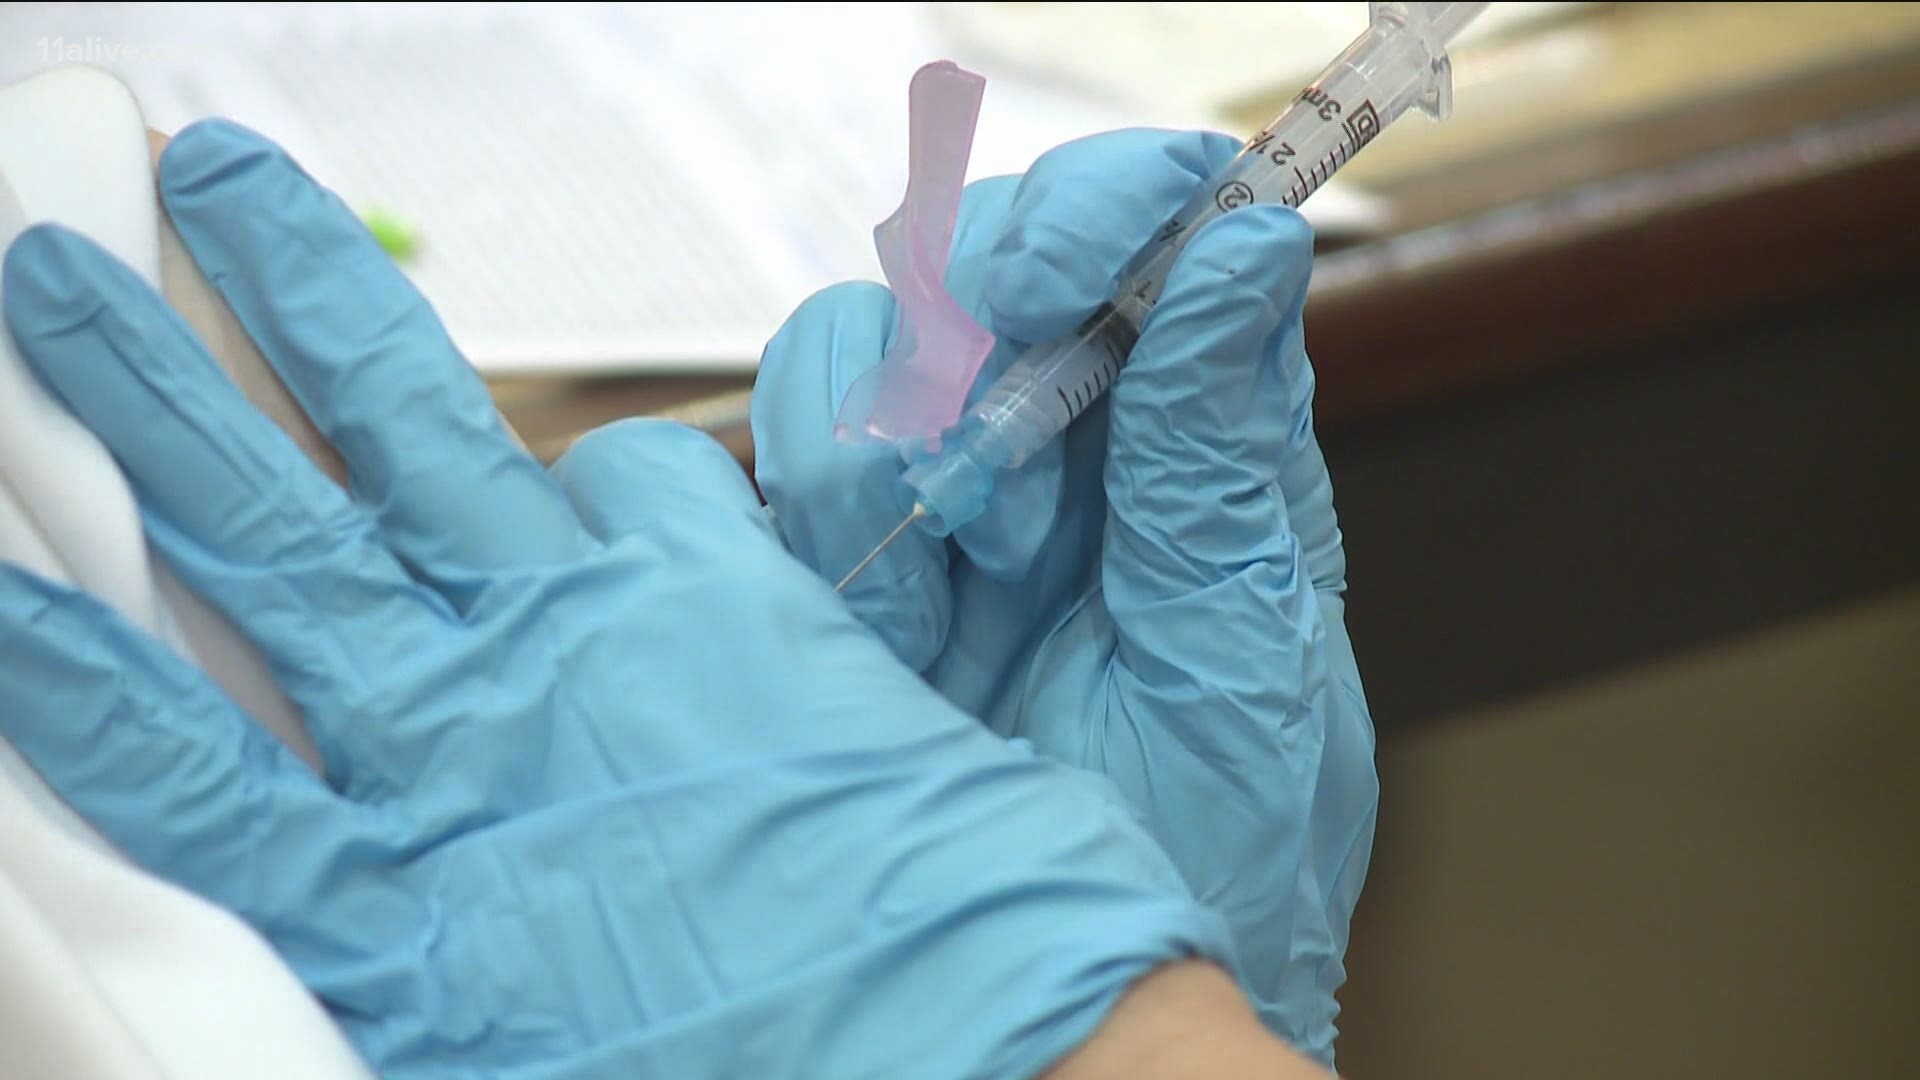 A massive expansion to vaccine eligibility was announced Wednesday, but getting a vaccine appointment is still a challenge.